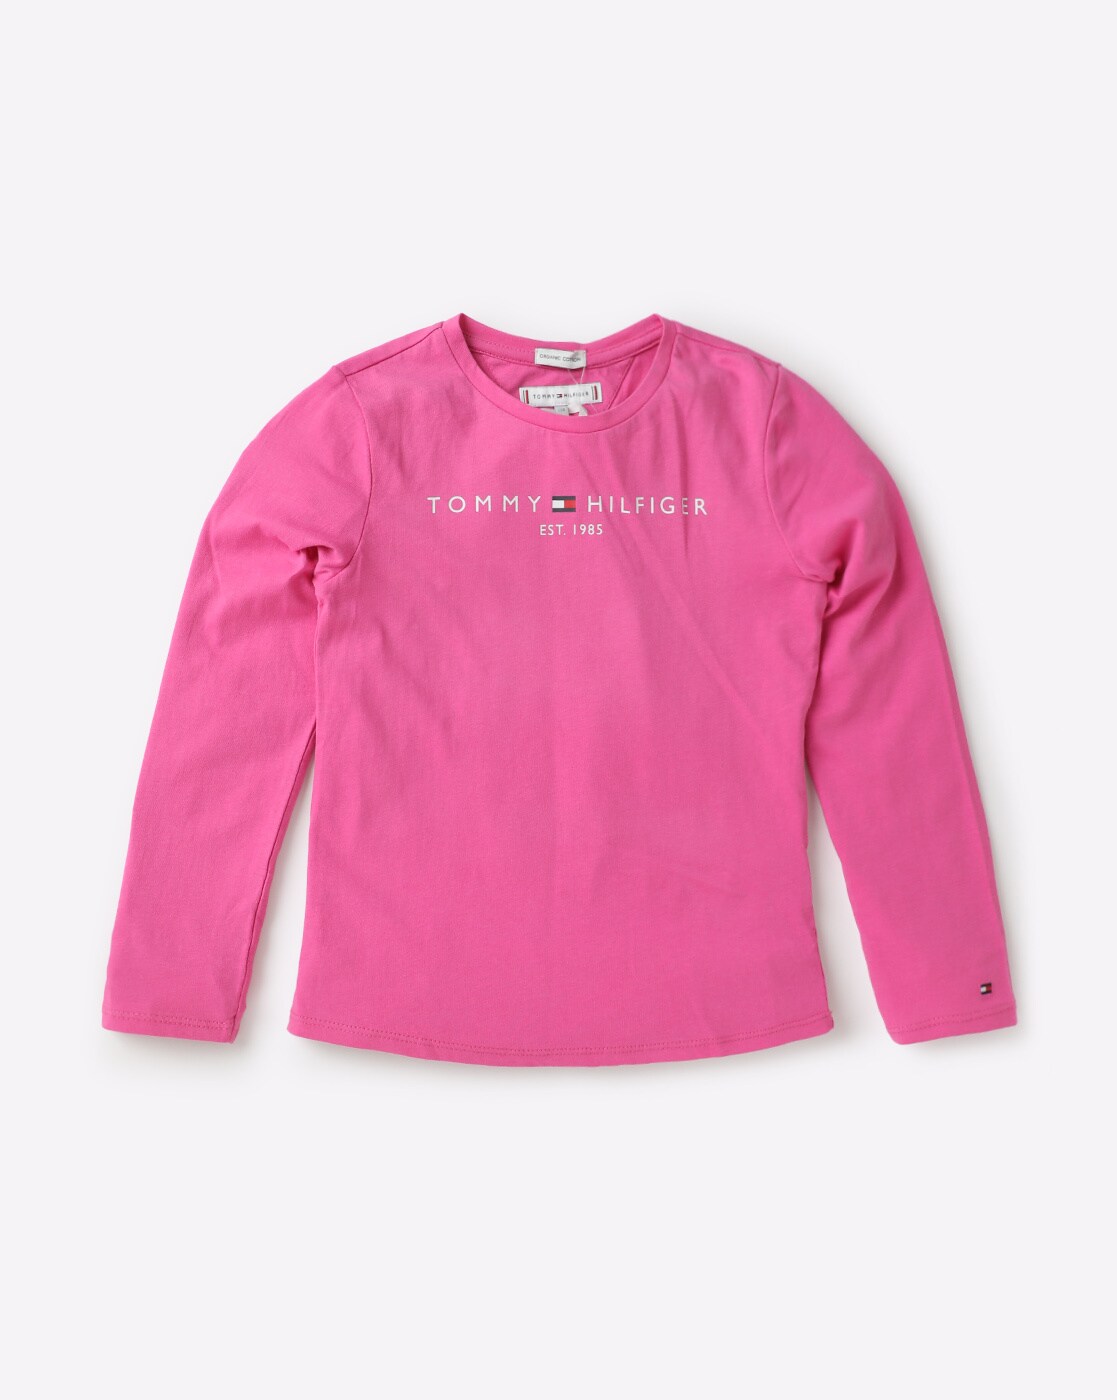 Buy Pink Tshirts for Girls by TOMMY HILFIGER Online